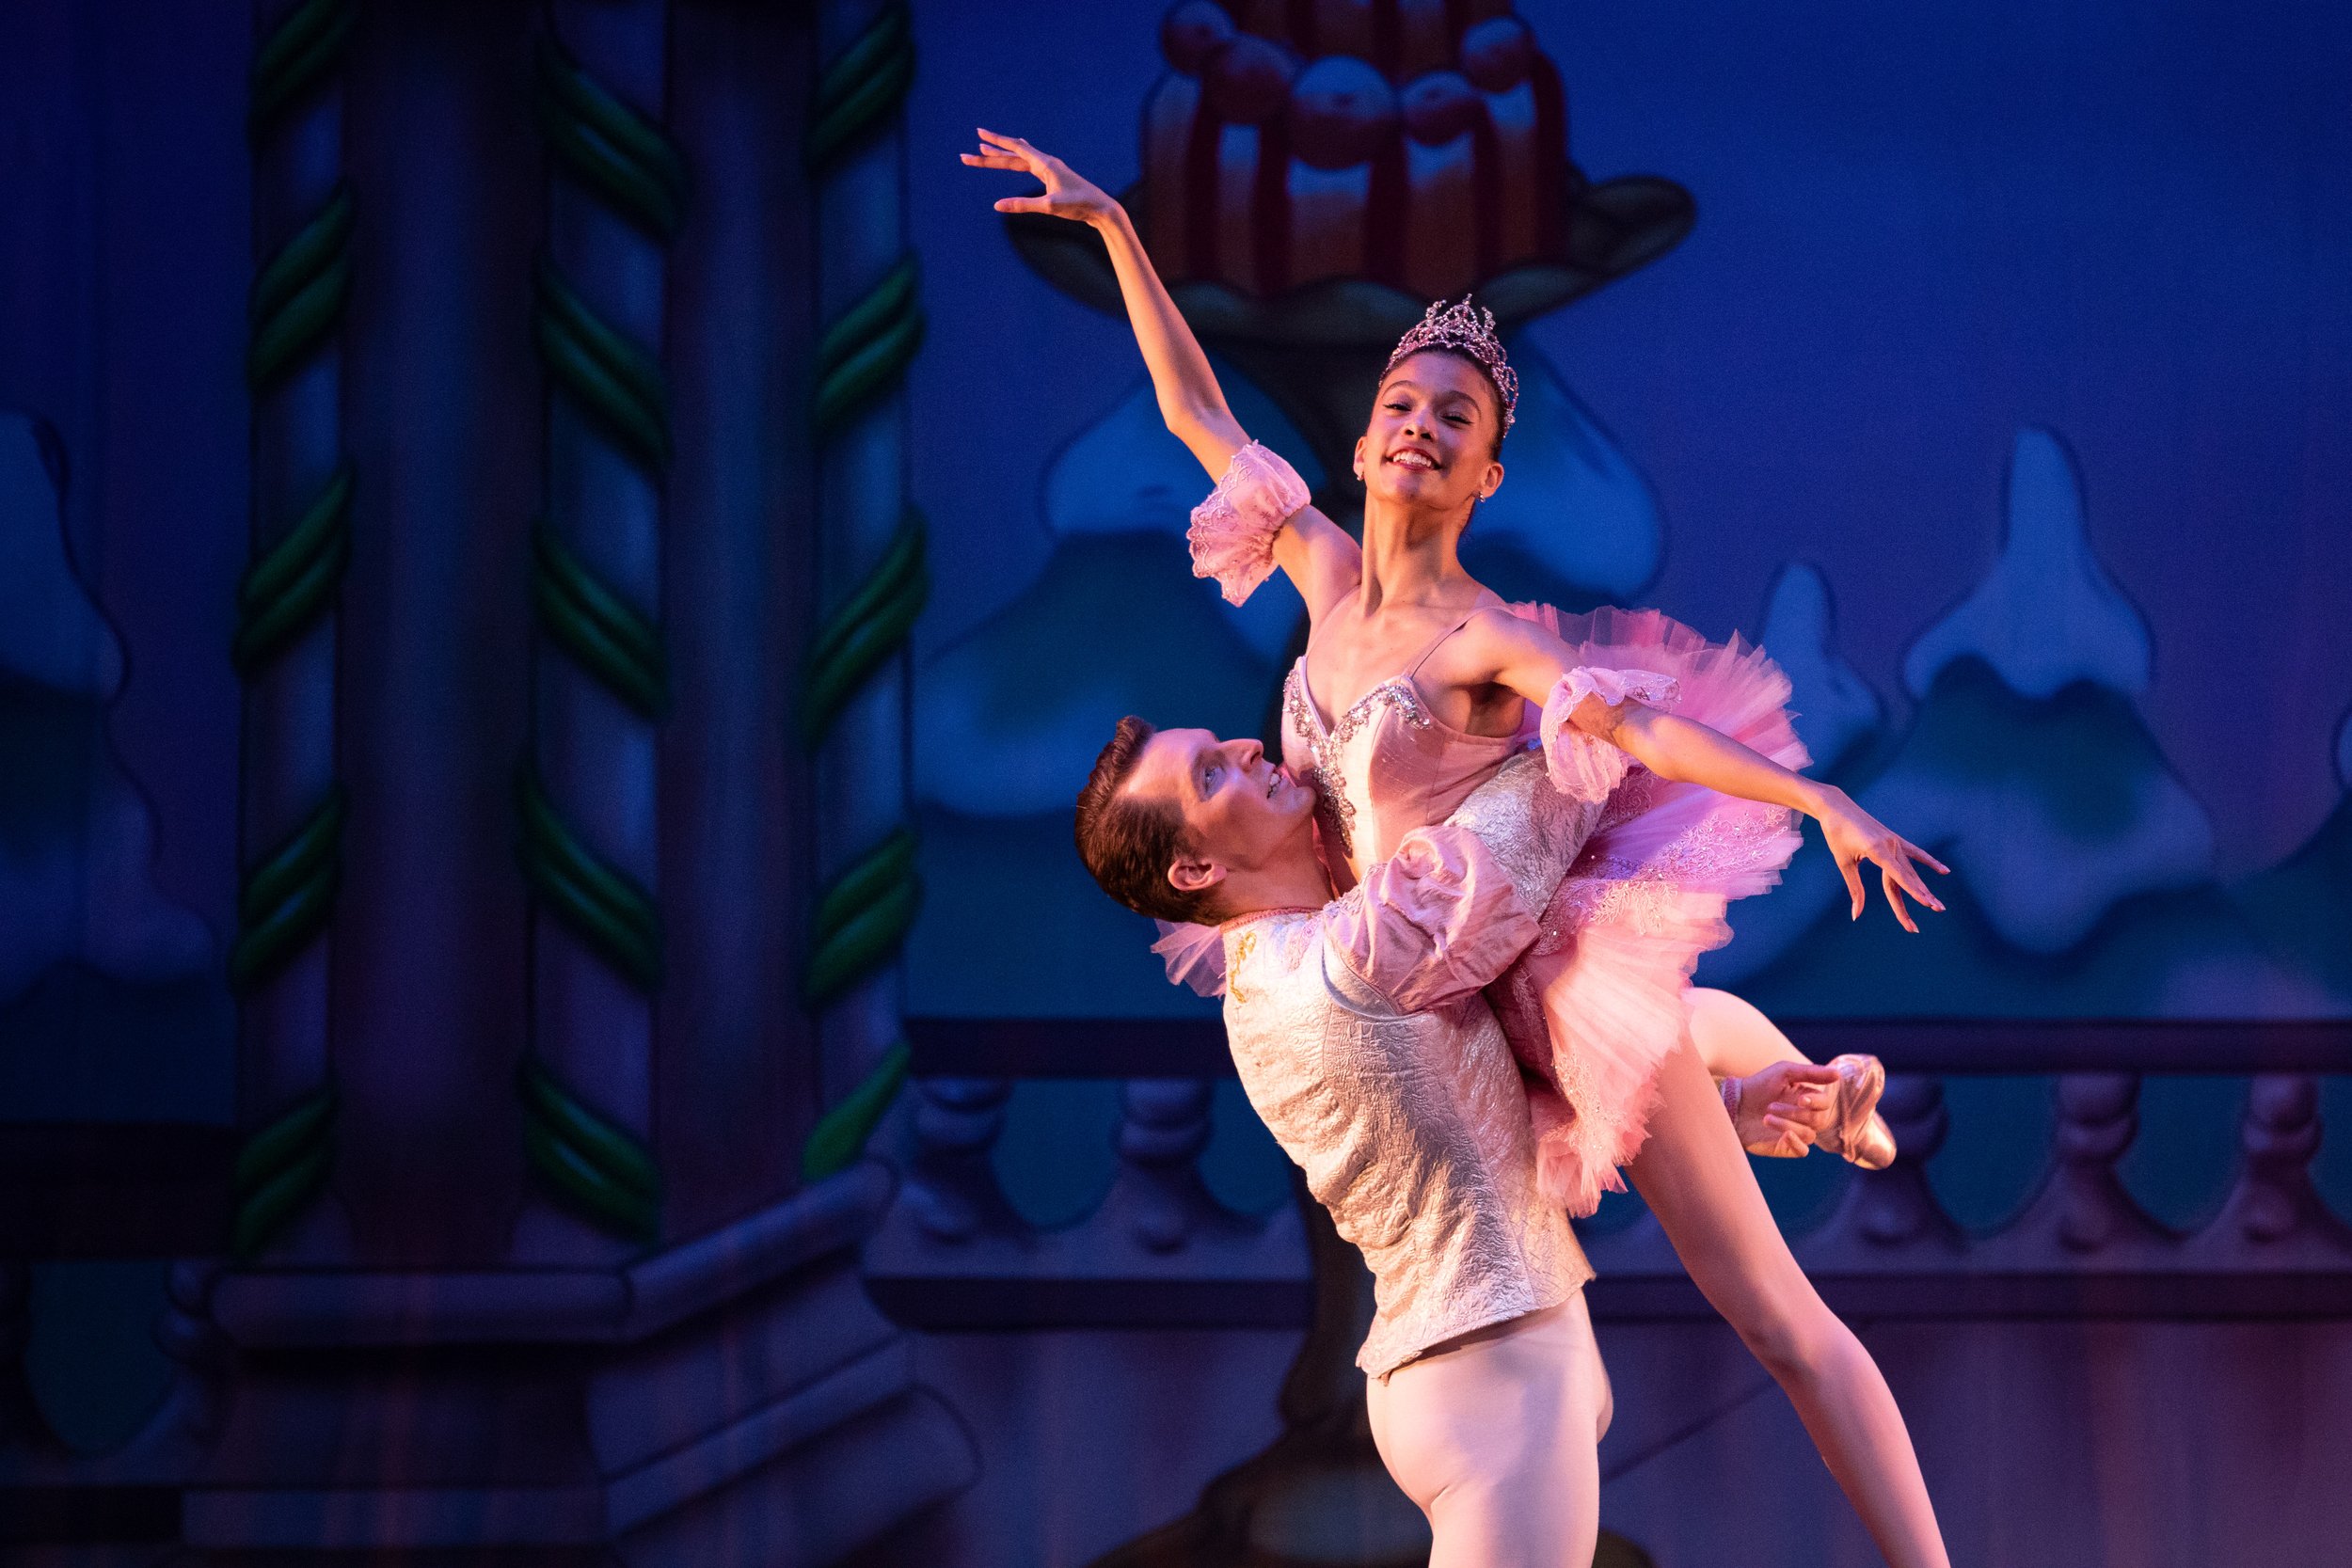  Jasime Harrison (right) and Maté Szentes (left) dancing together, as the characters Sugar Plum Fairy and her Cavalier, during the Grand Pas de Deux right before the finale of The Nutcracker performed by Westside Ballet of Santa Monica at the The Bro